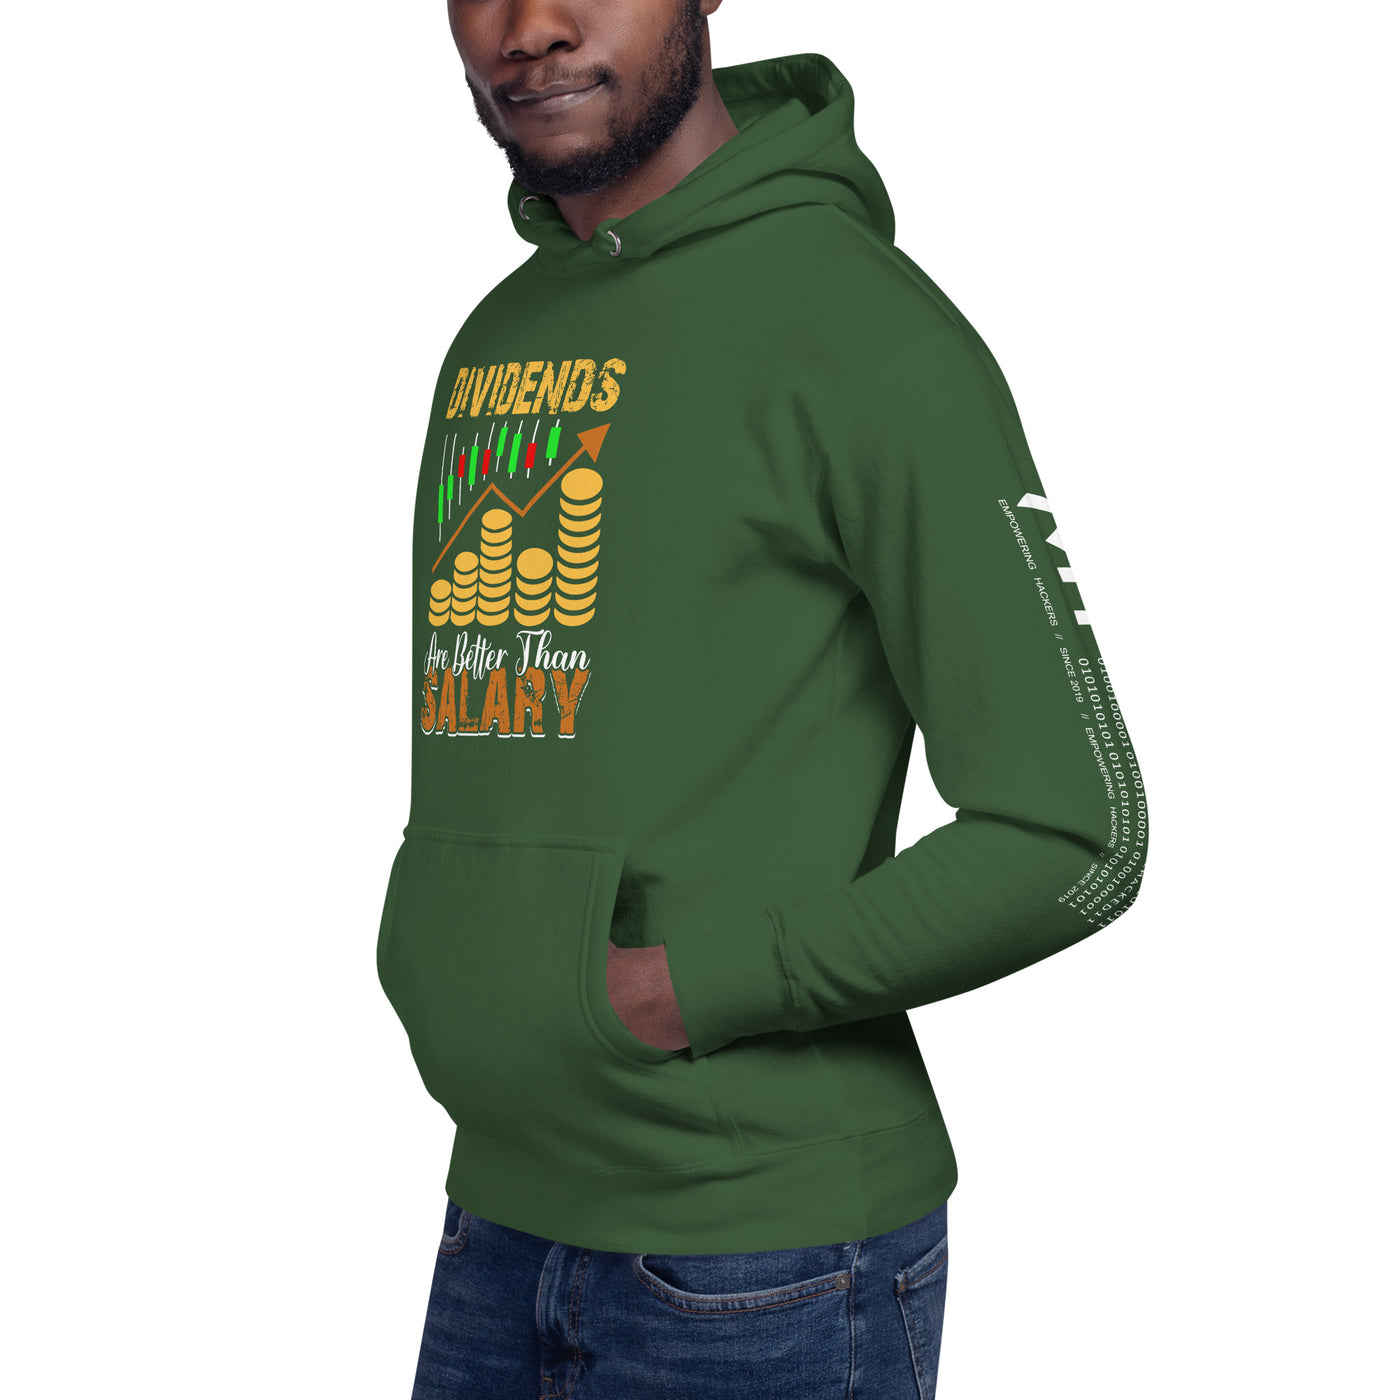 Dividends are Better than Salary - Unisex Hoodie